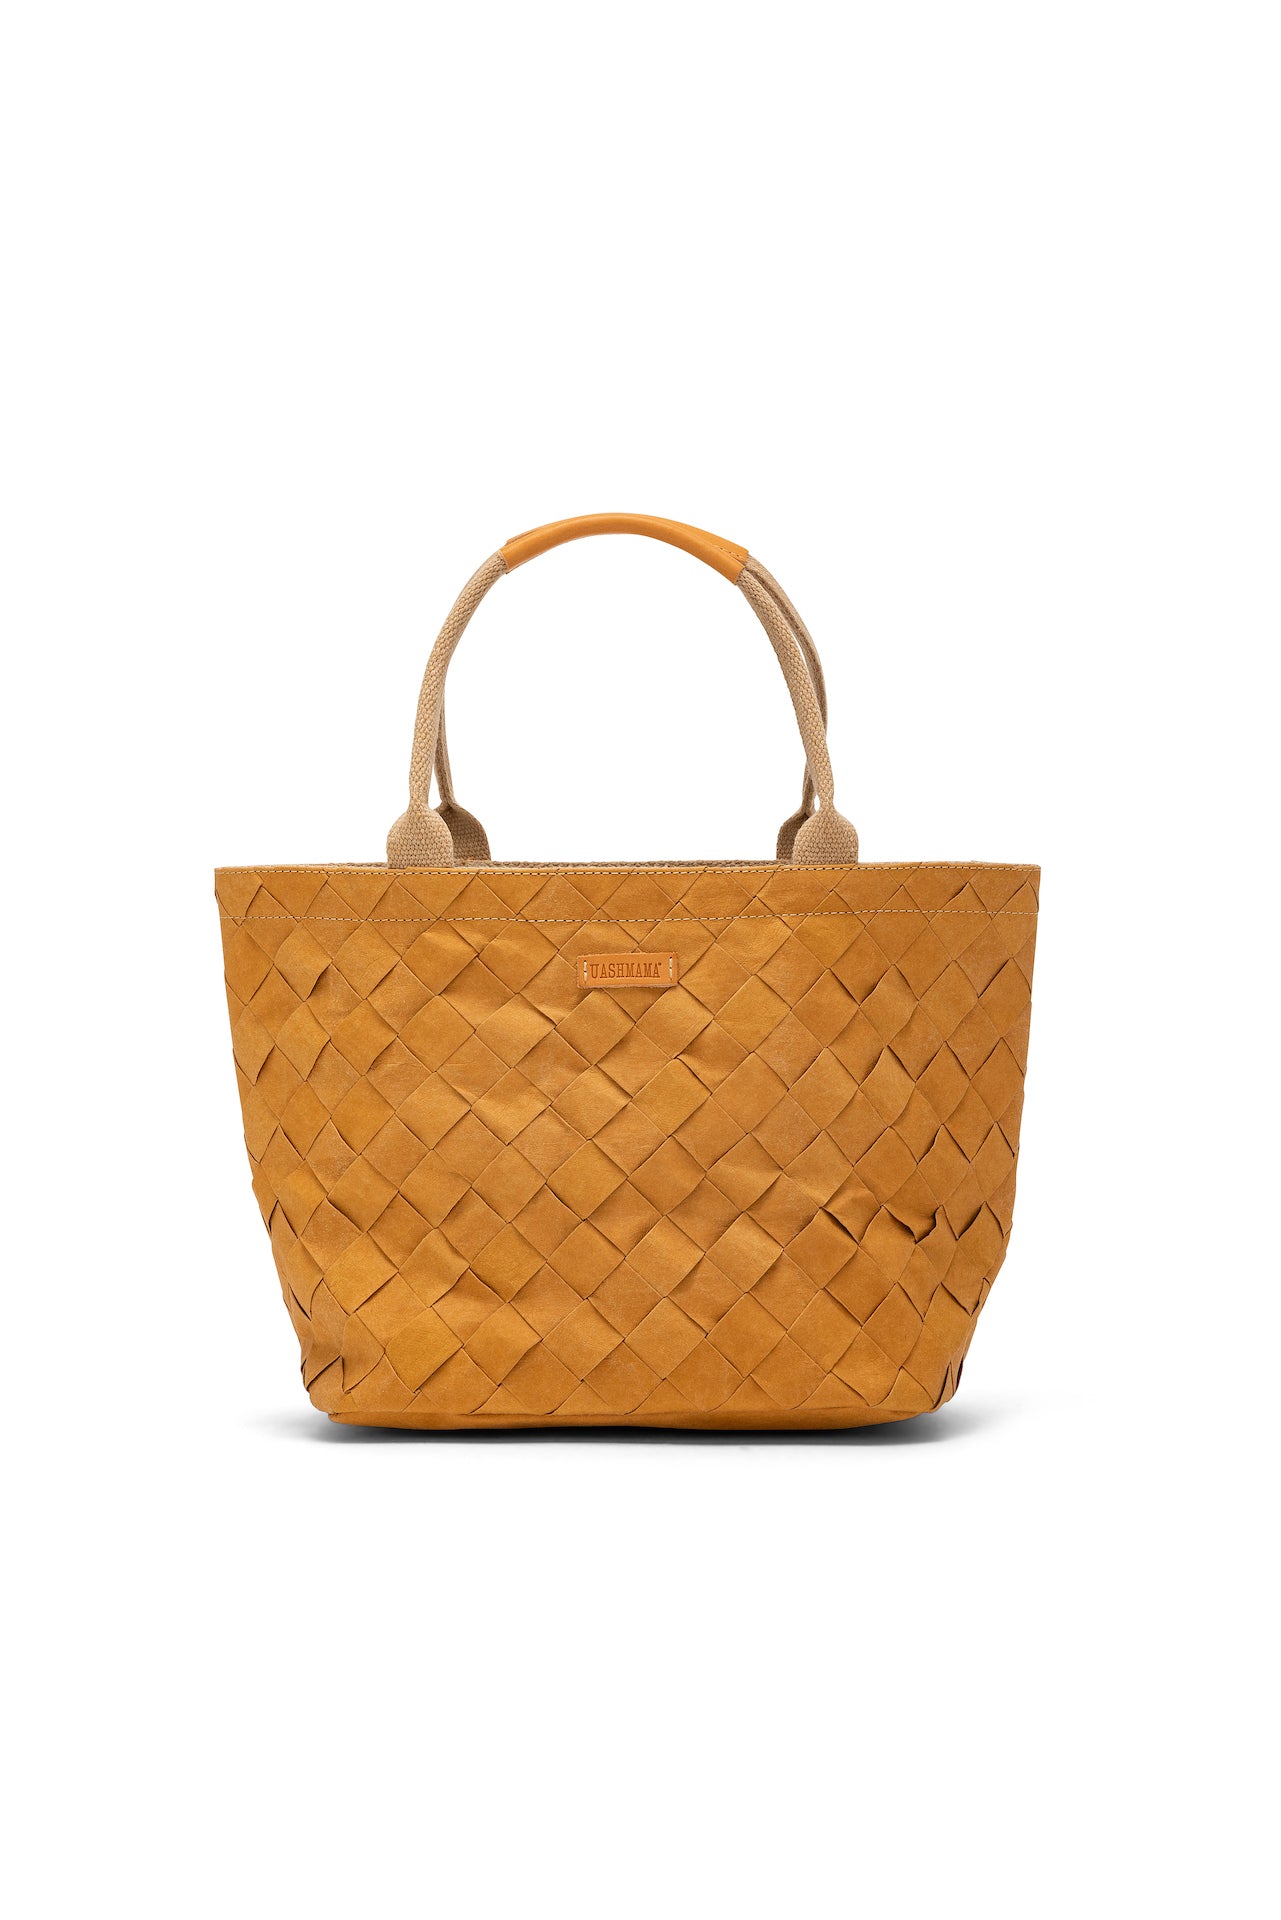 A woven tote in camel washable paper with canvas and leather handles.